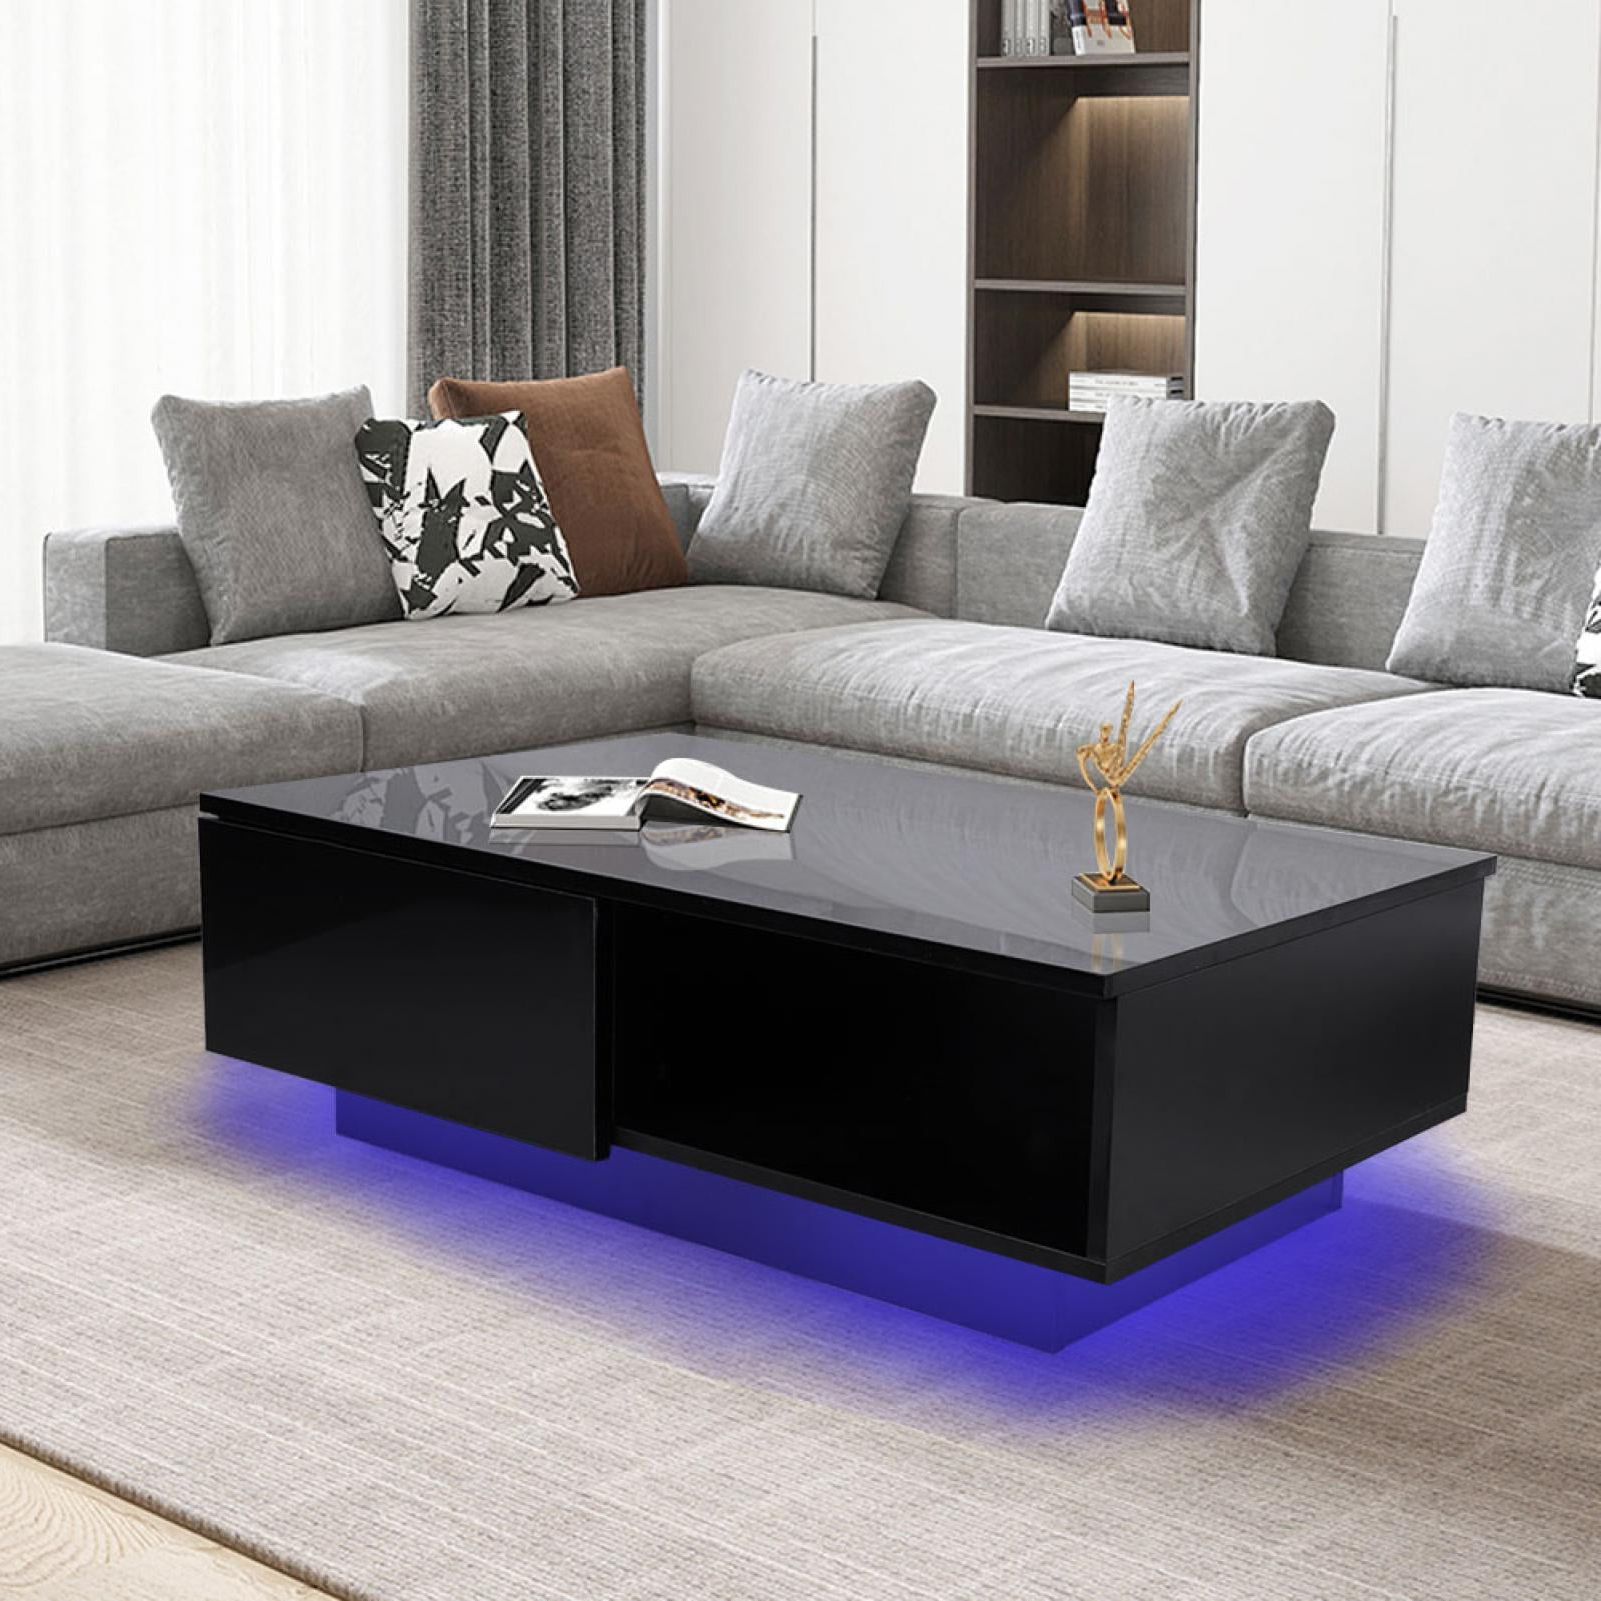 Well Liked Ebtools Rectangle Led Coffee Table, Black Modern High Gloss Furniture With Regard To Rectangular Led Coffee Tables (View 6 of 15)